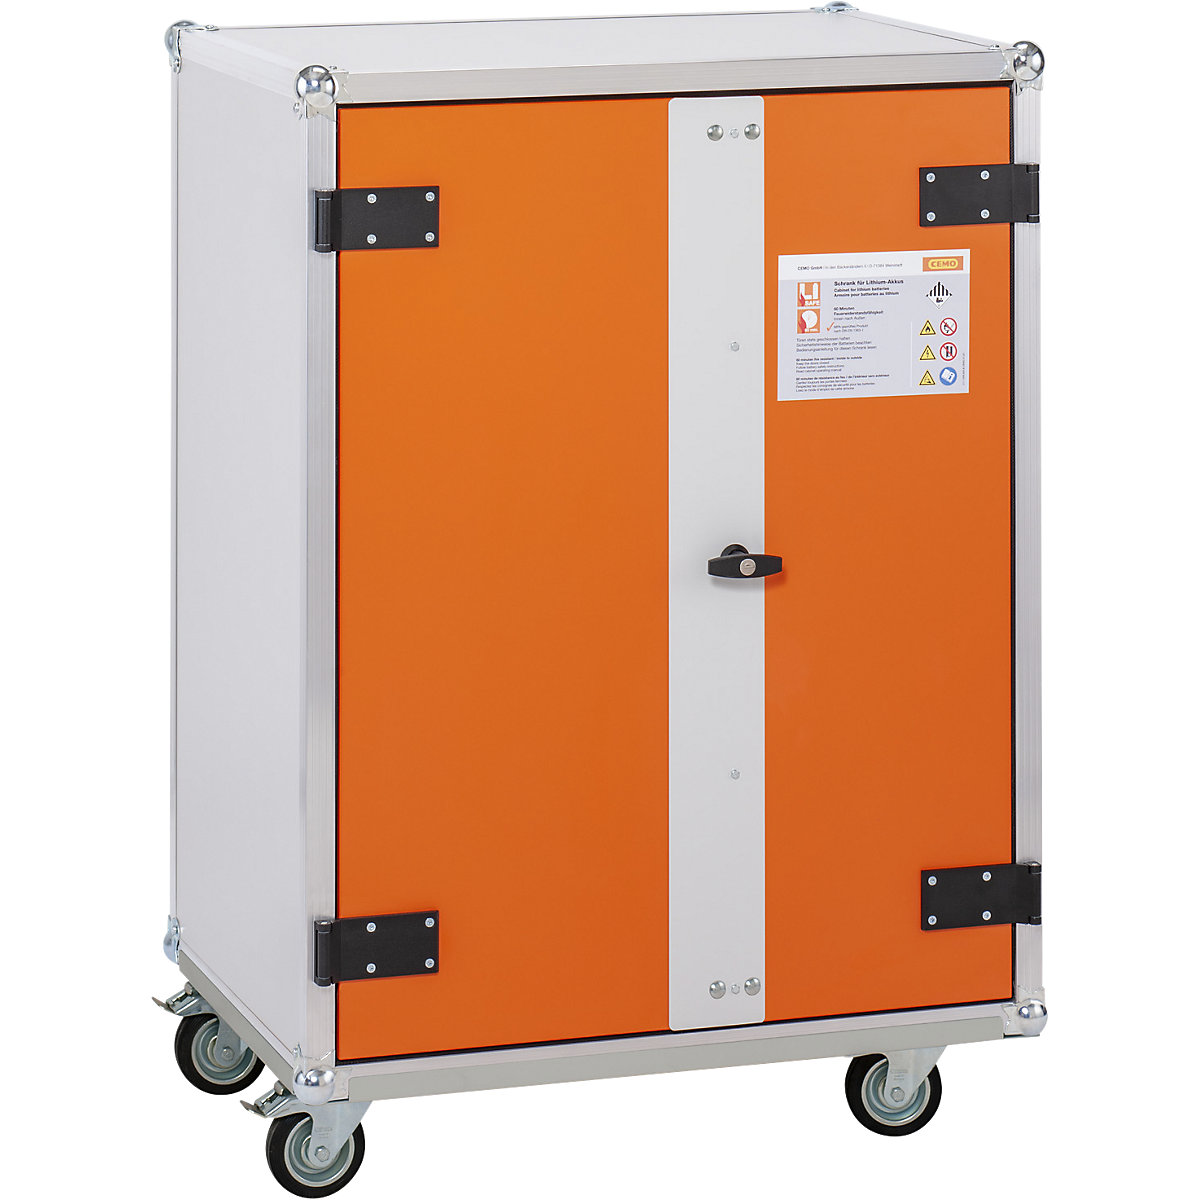 PREMIUM safety battery charging cabinet - CEMO